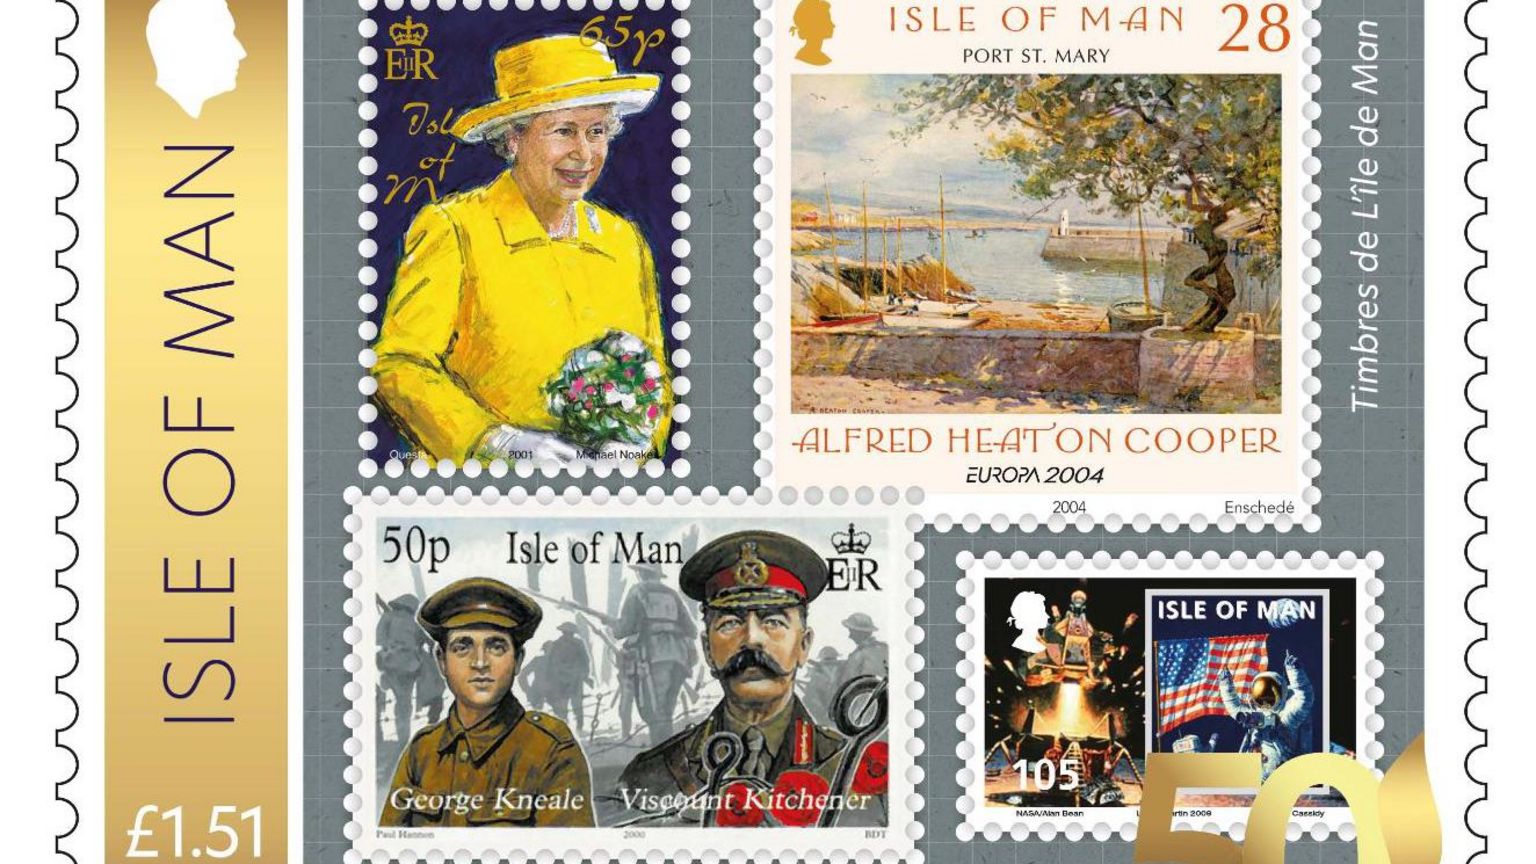 Stamps reflecting issues from the earlies 2000s